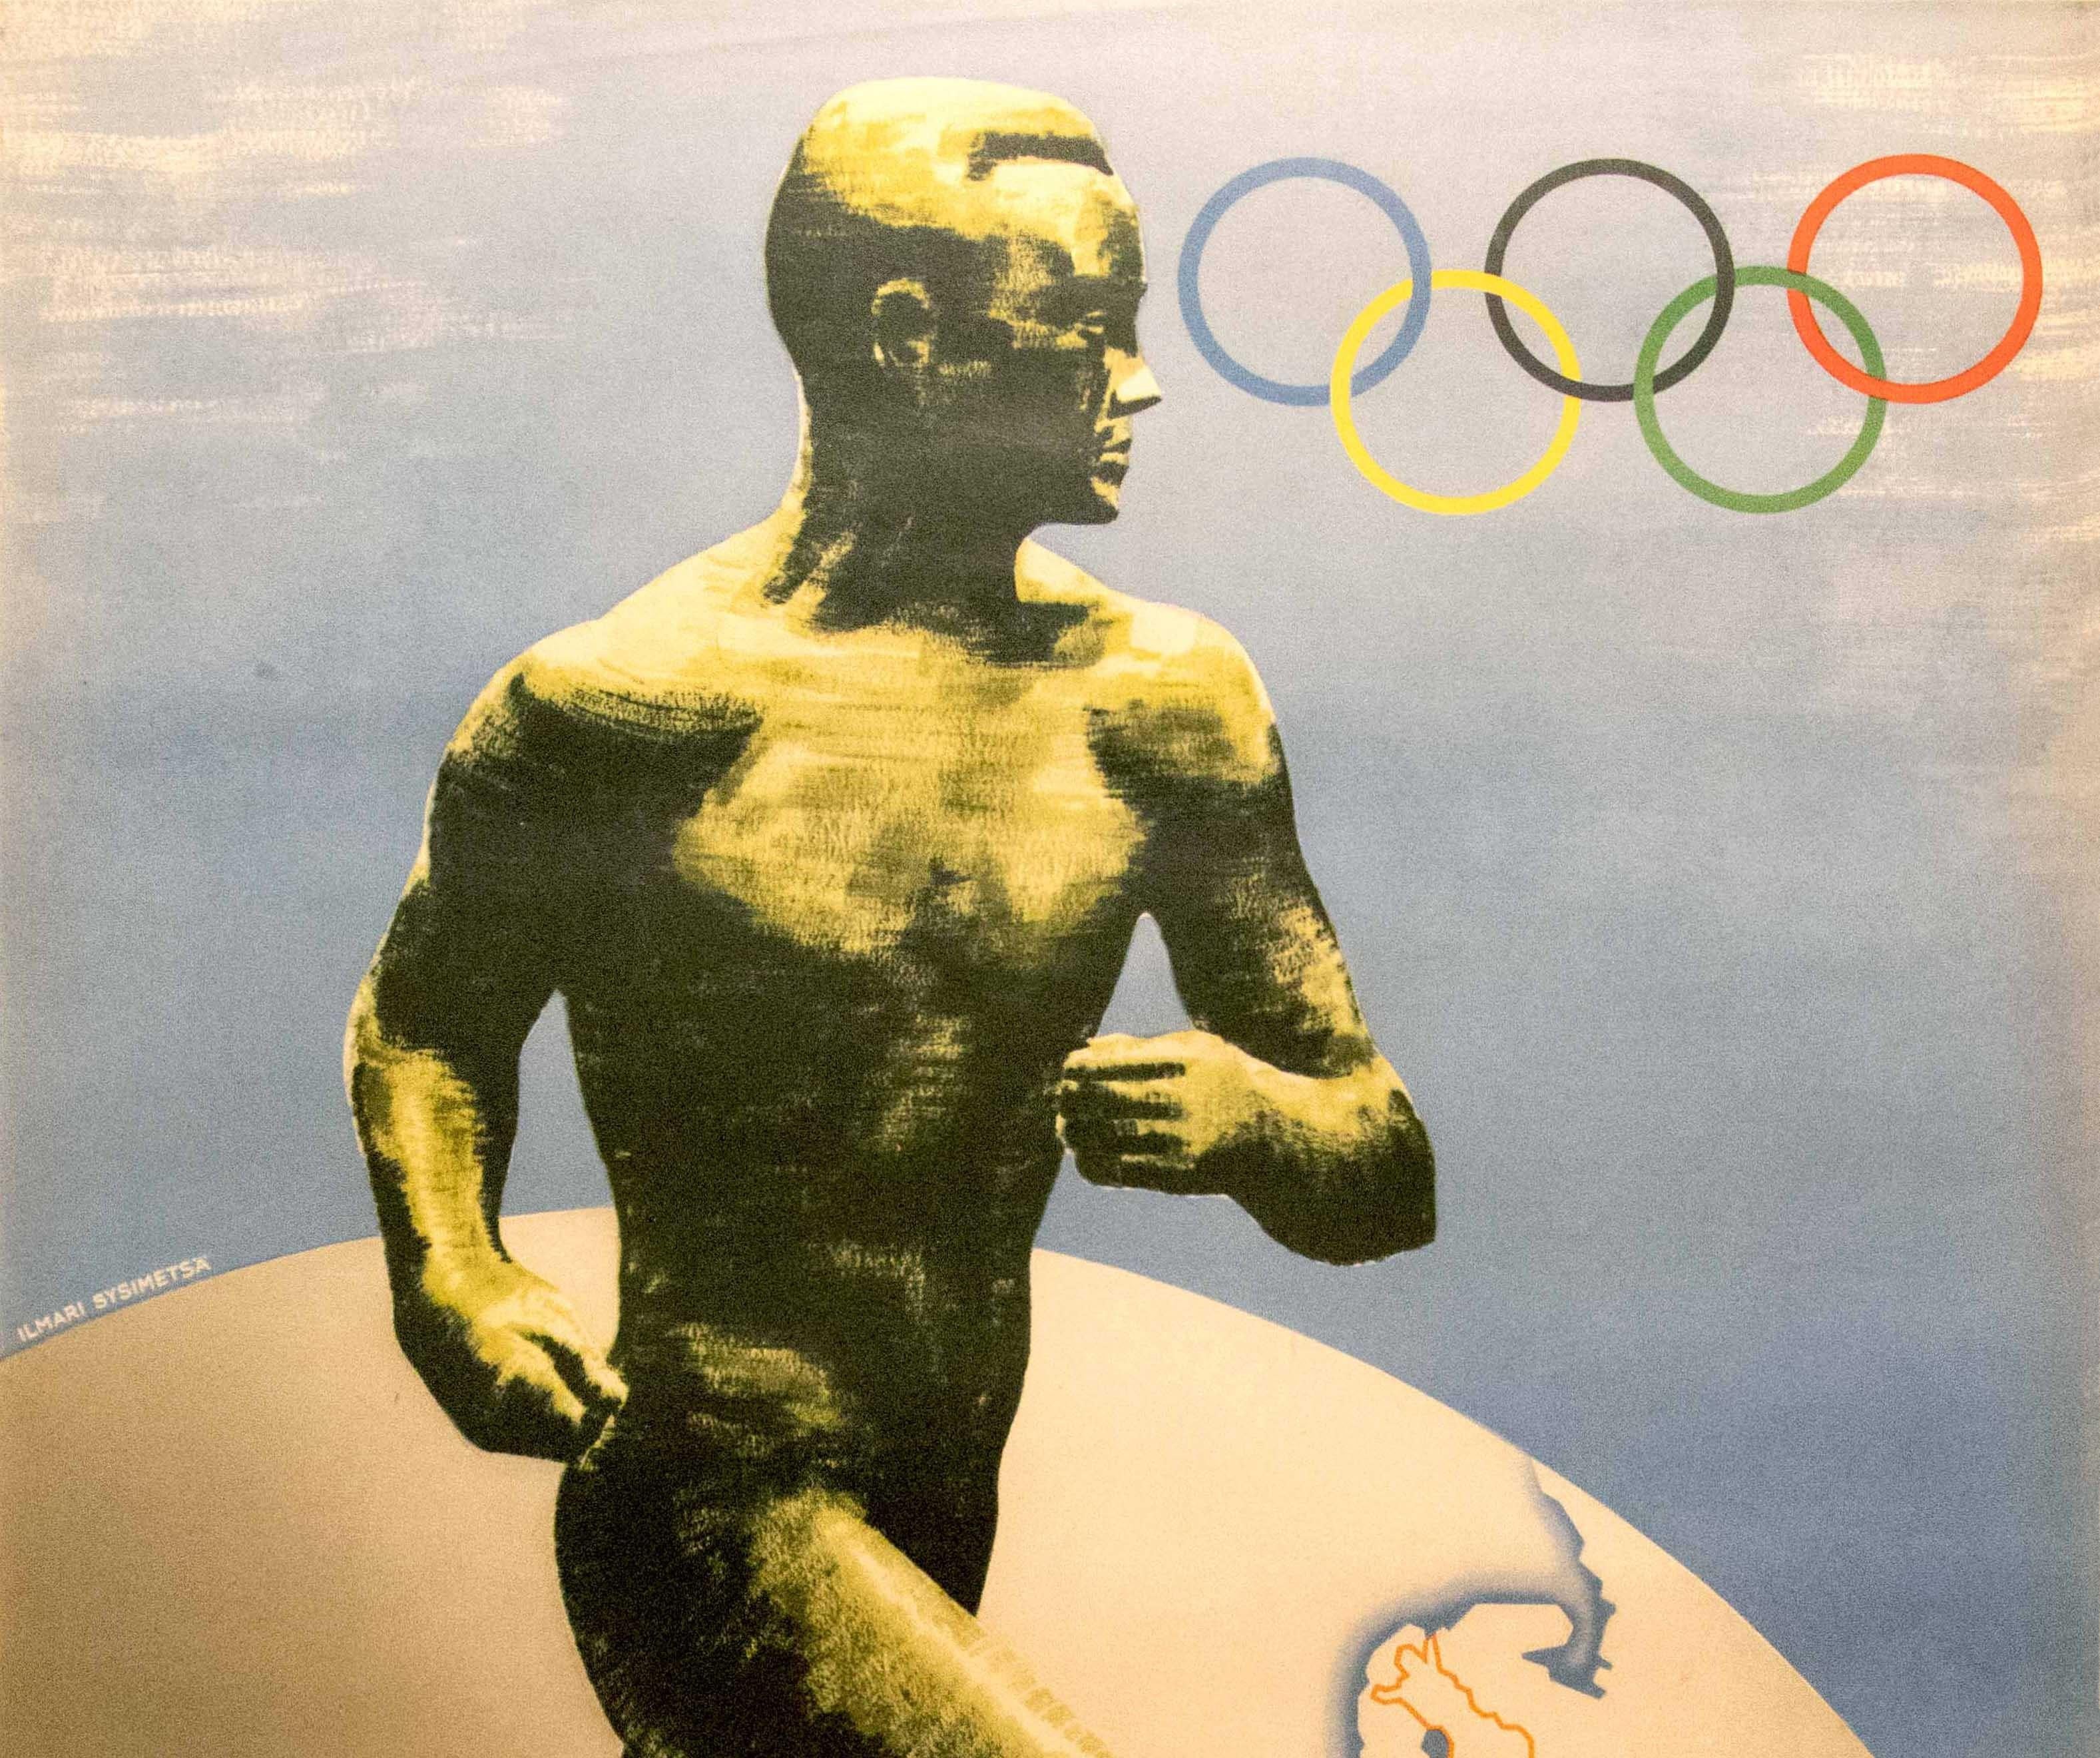 Original vintage sports poster for the 1940 Summer Olympic Games in Helsinki Finland featuring a dynamic image depicting the sculpture of an athlete running in front of a globe marking the outline of Finland with the Olympic rings displayed above